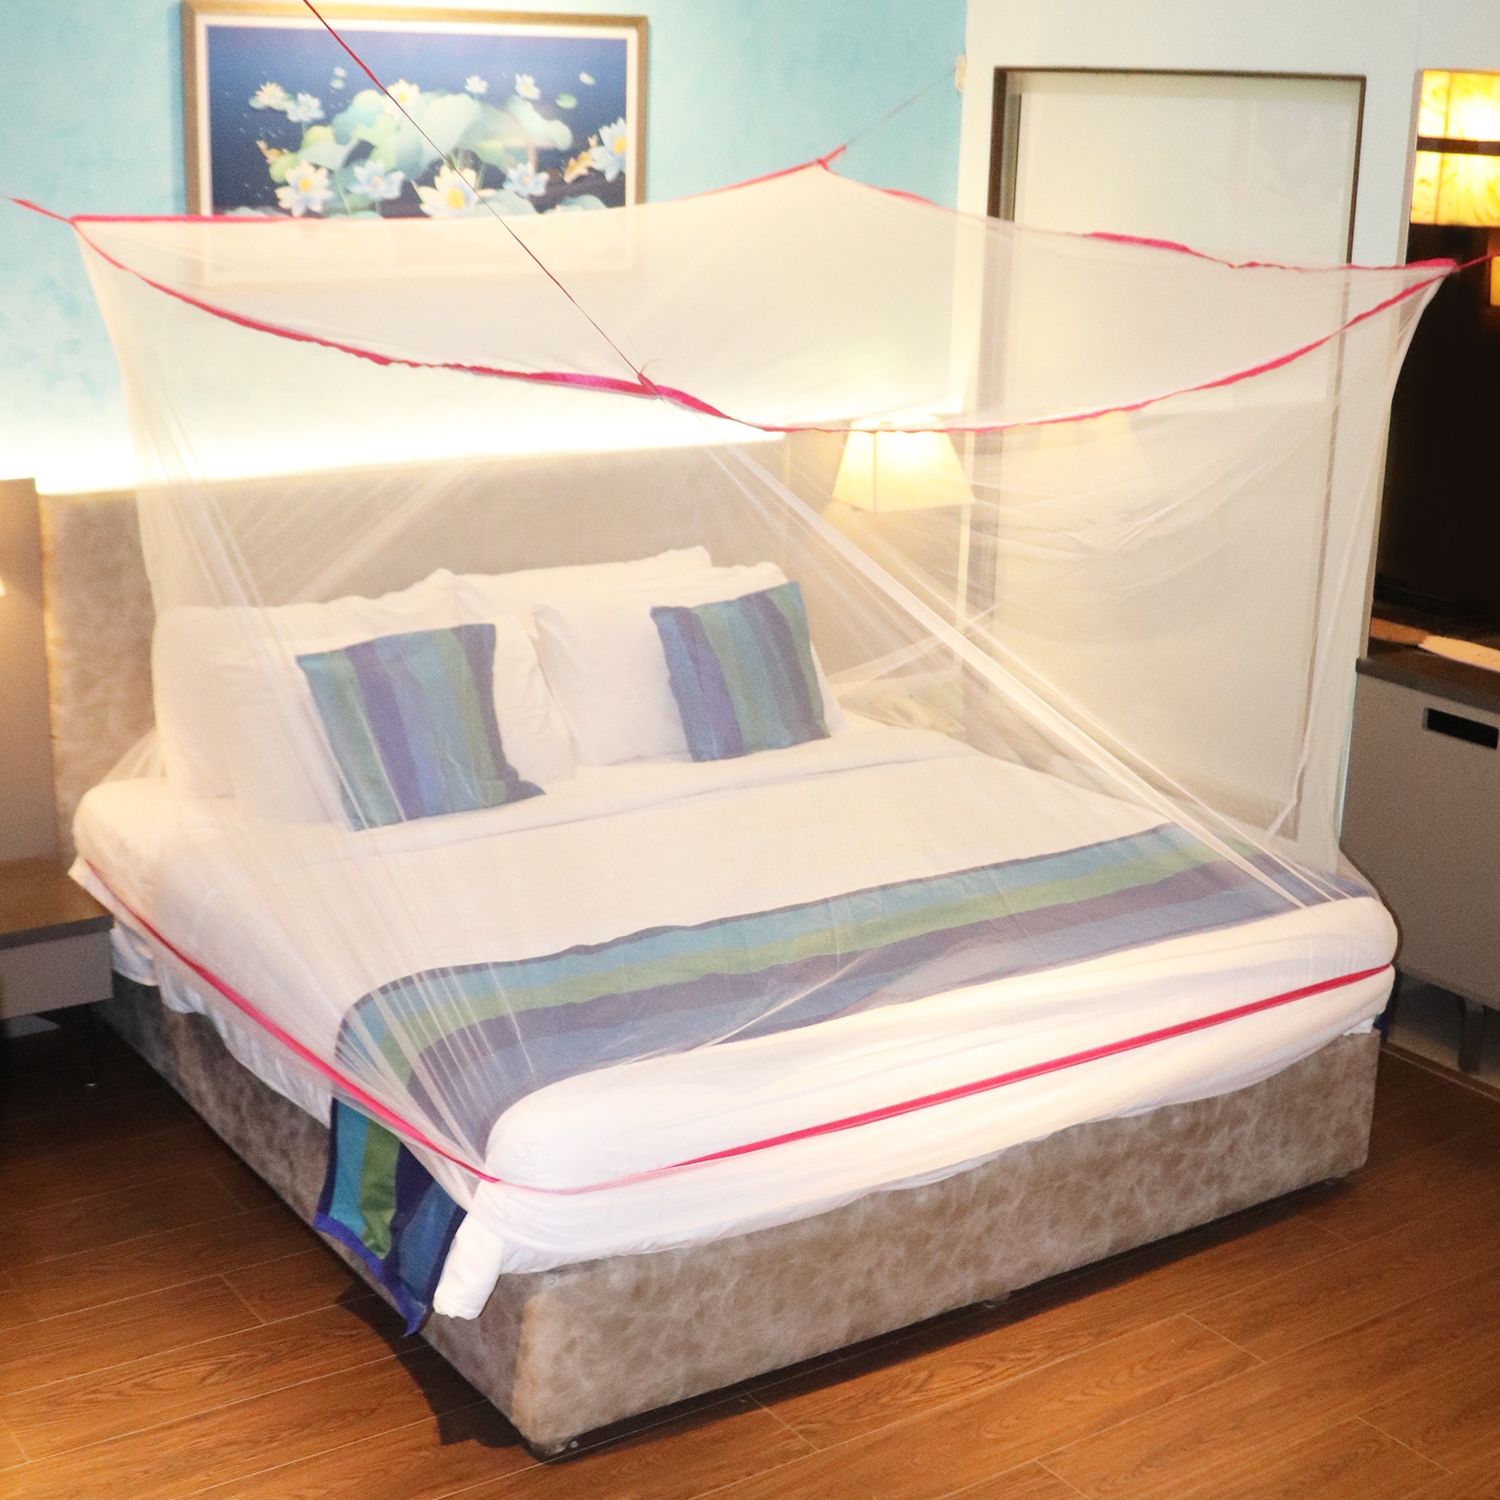 SILVER SHINE | Mosquito Net for Double Bed, King-Size, Square Hanging Foldable Polyester Net White And Pink 4